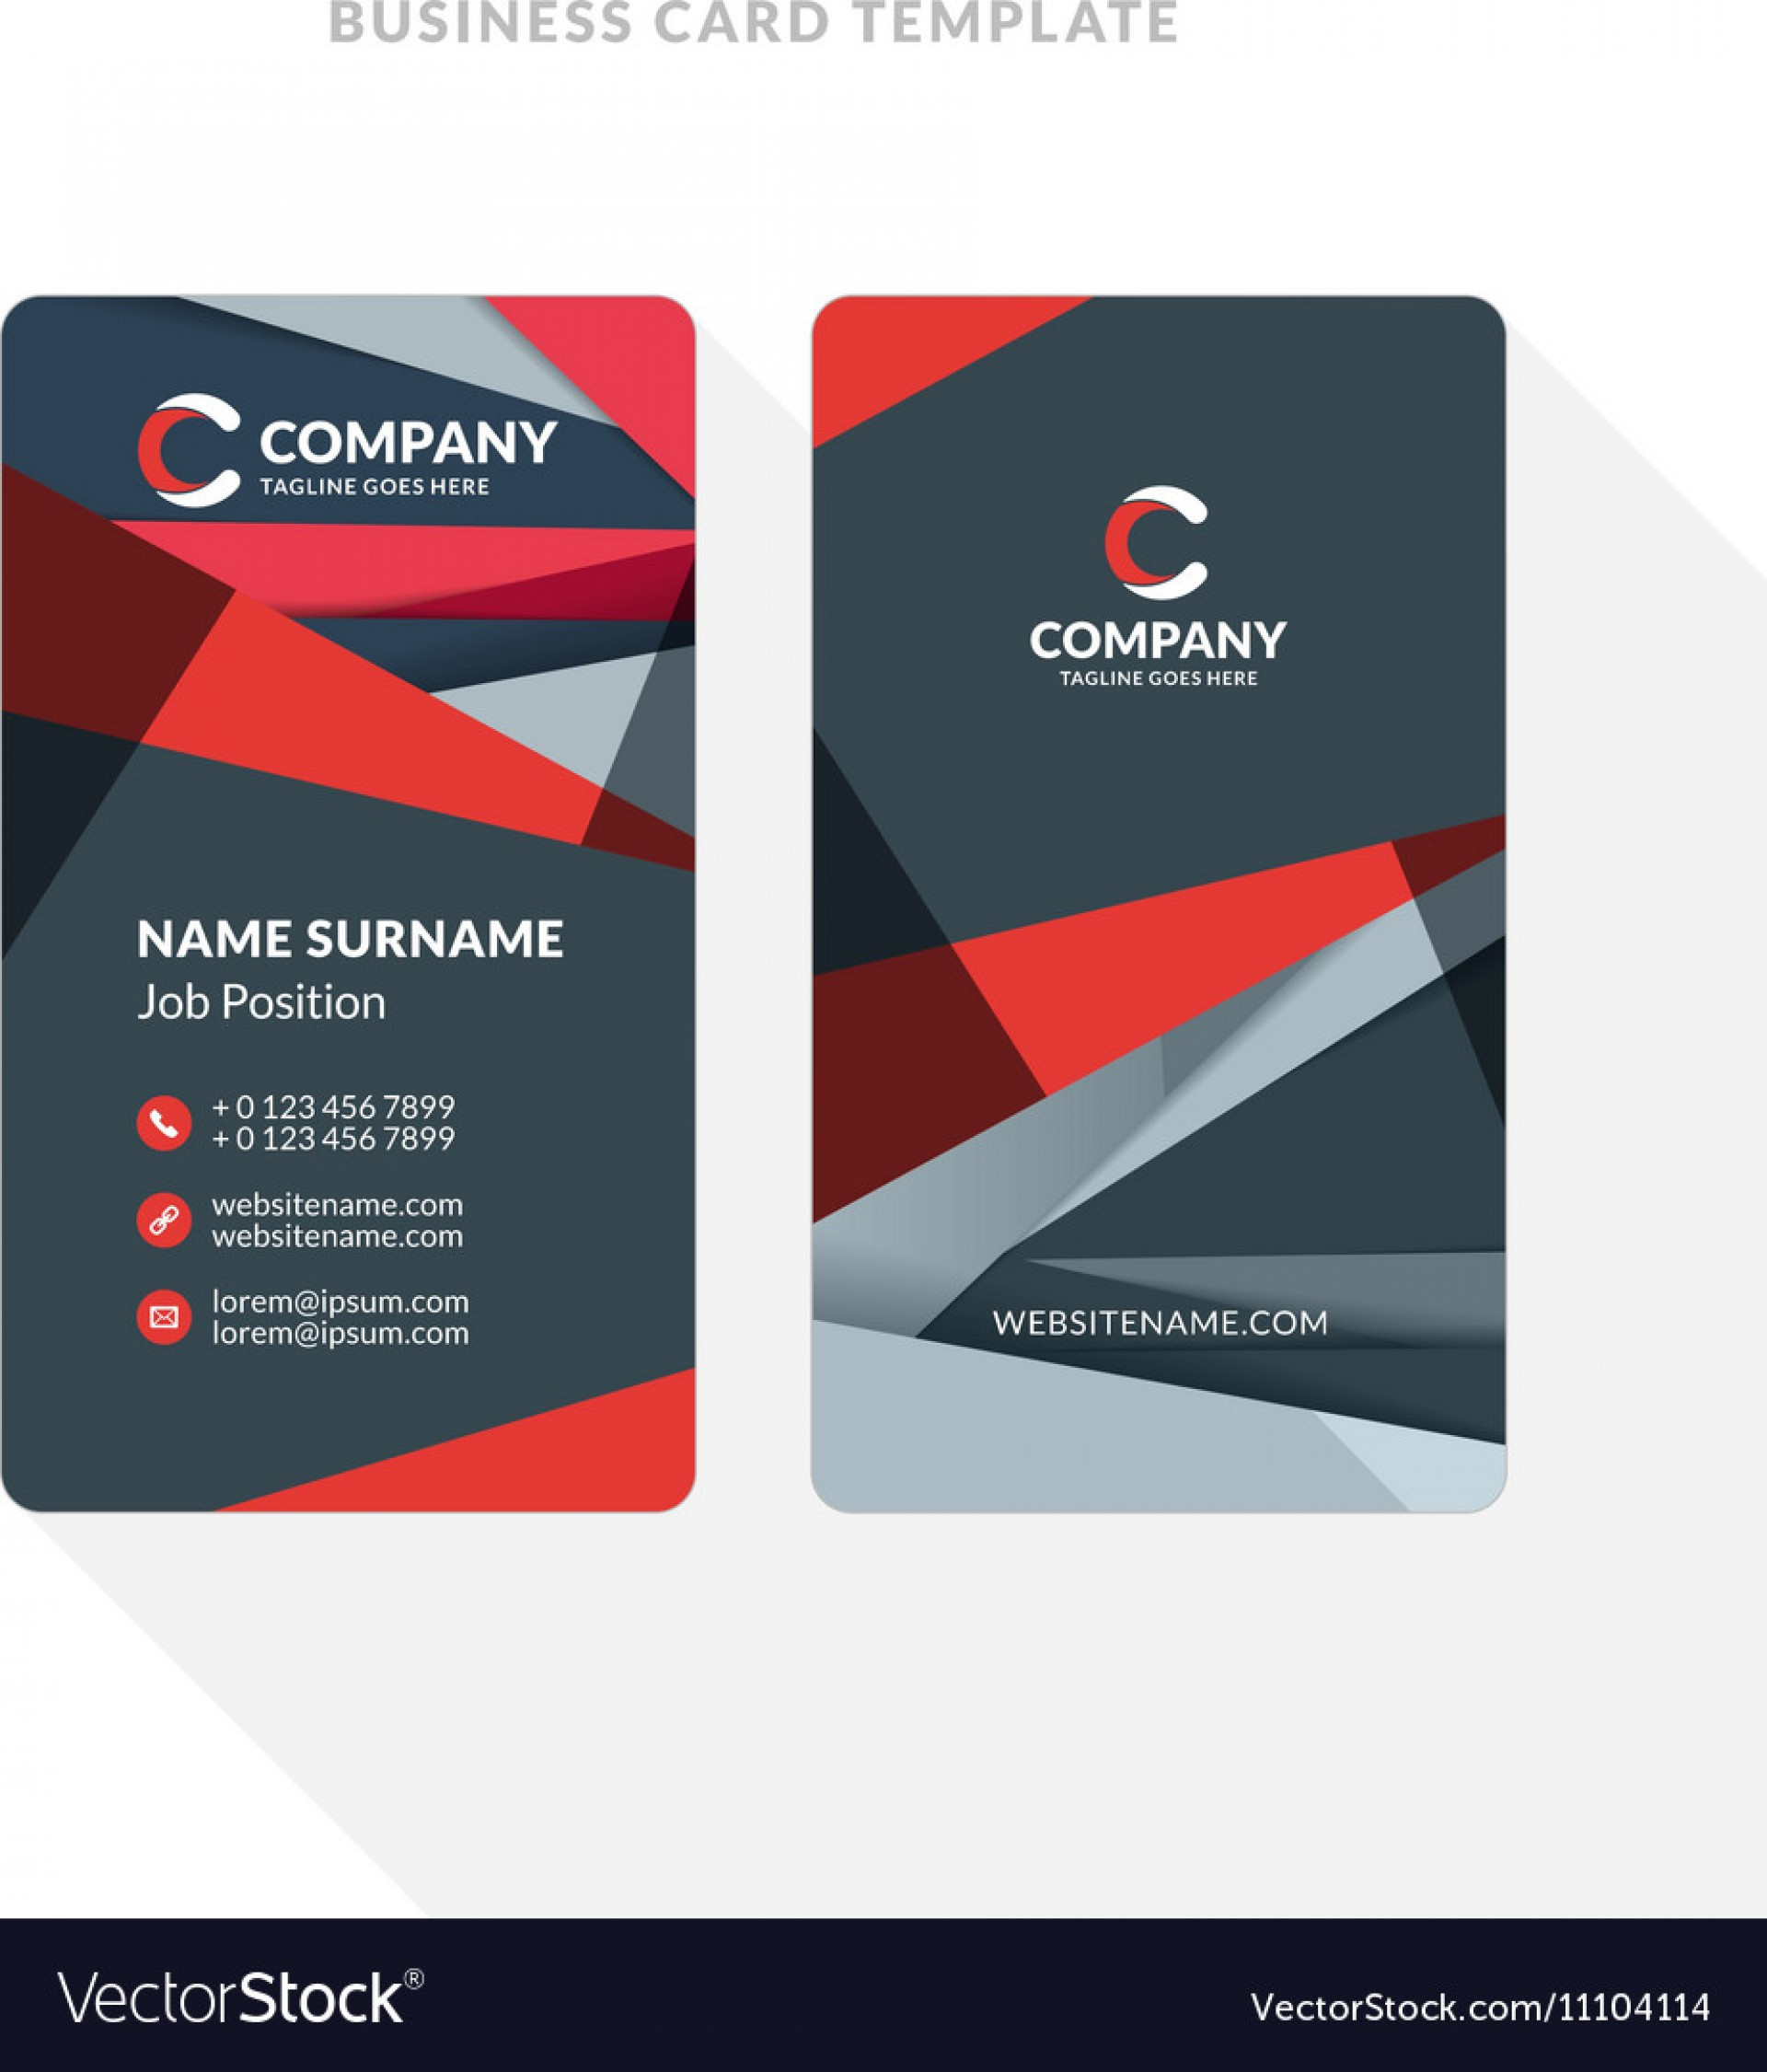 001 double sided business card template vertical with vector 1920x2252